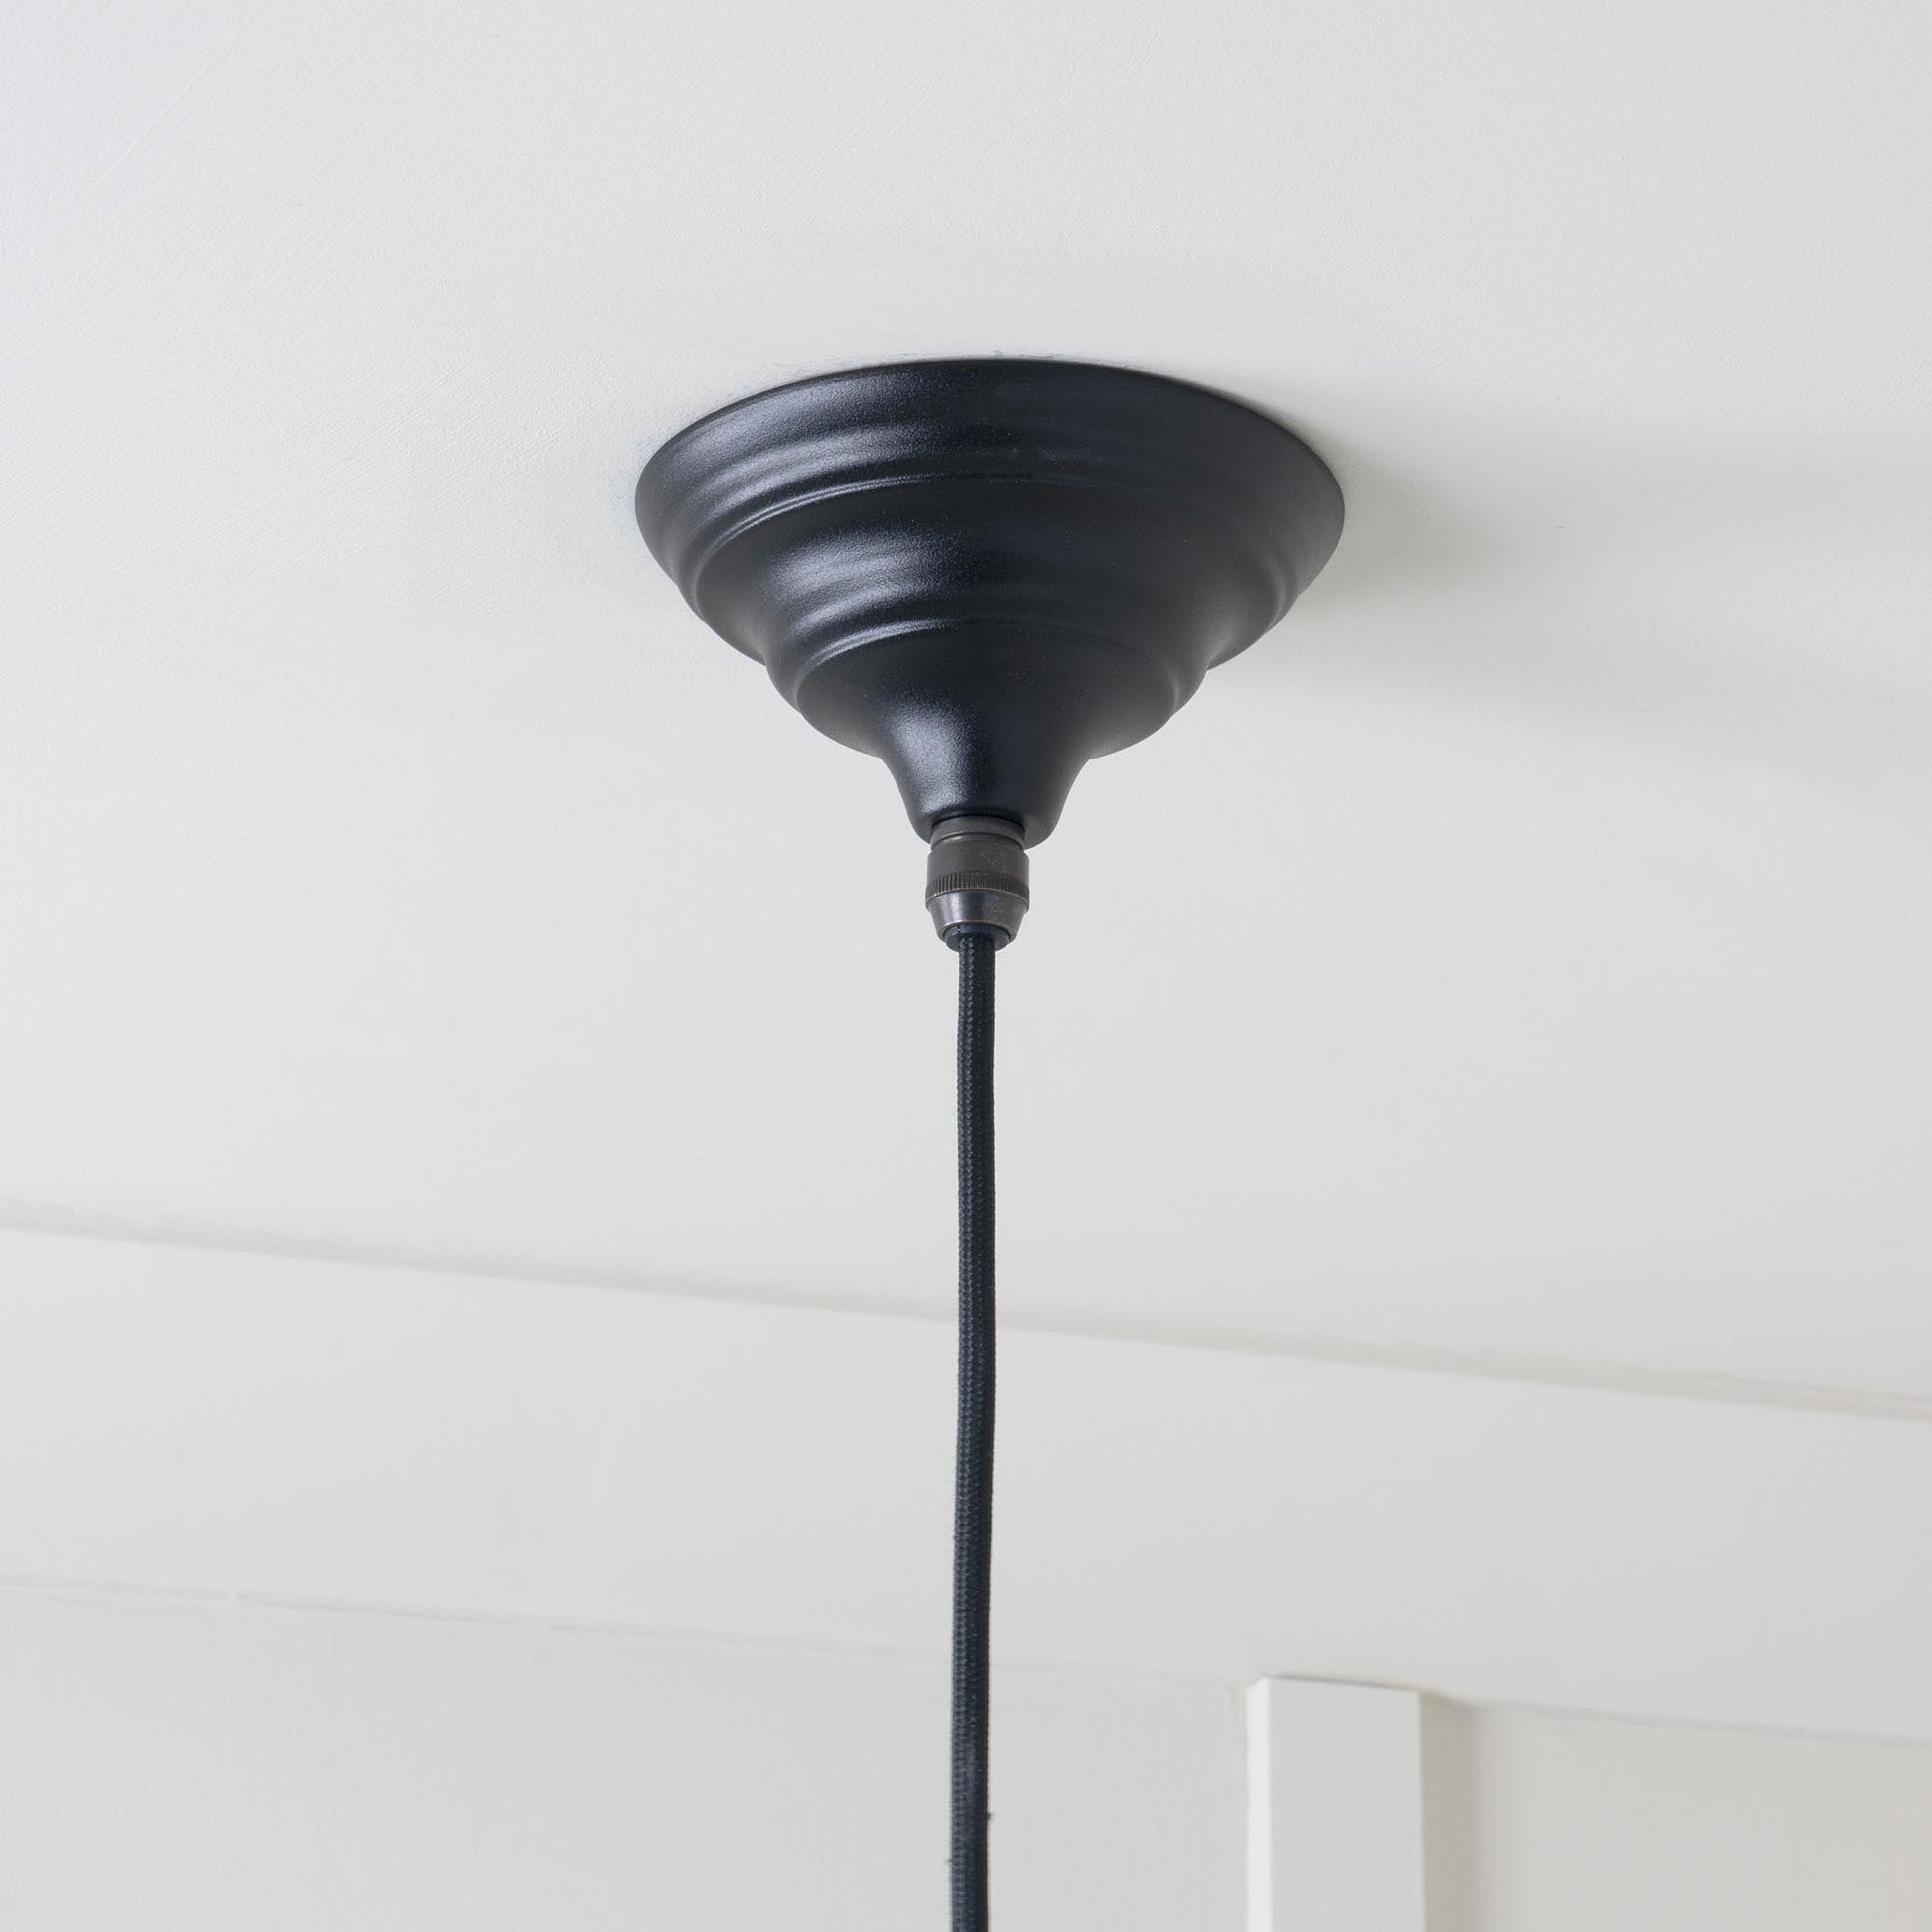 Hammered Nickel Harborne Pendant Light  Elan Black, close up view of fitting and cable.